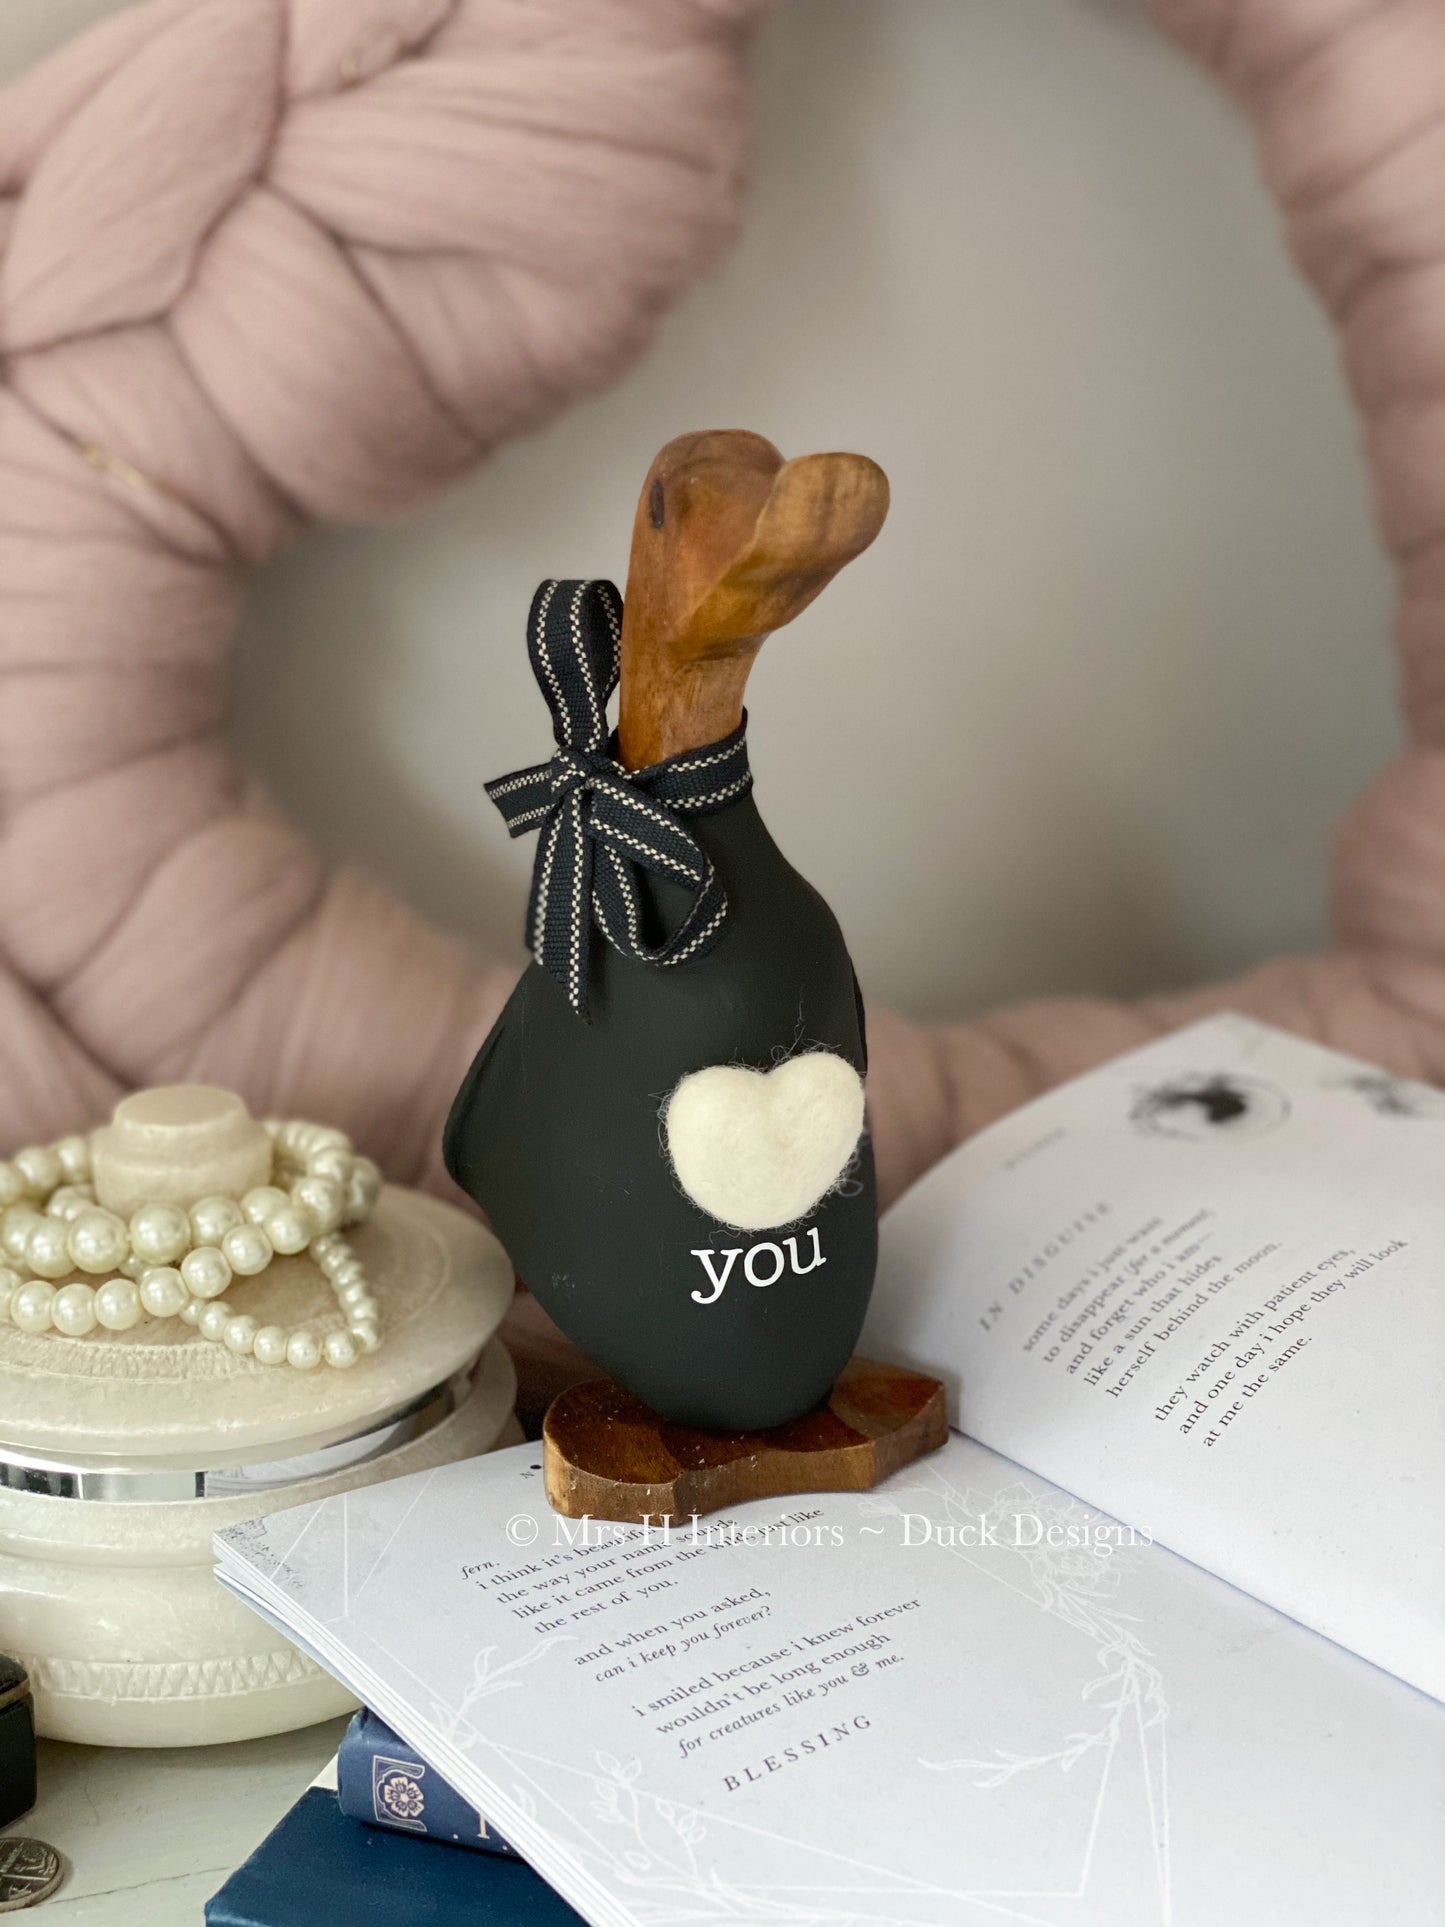 Love you - Decorated Wooden Duck in Boots by Mrs H the Duck Lady